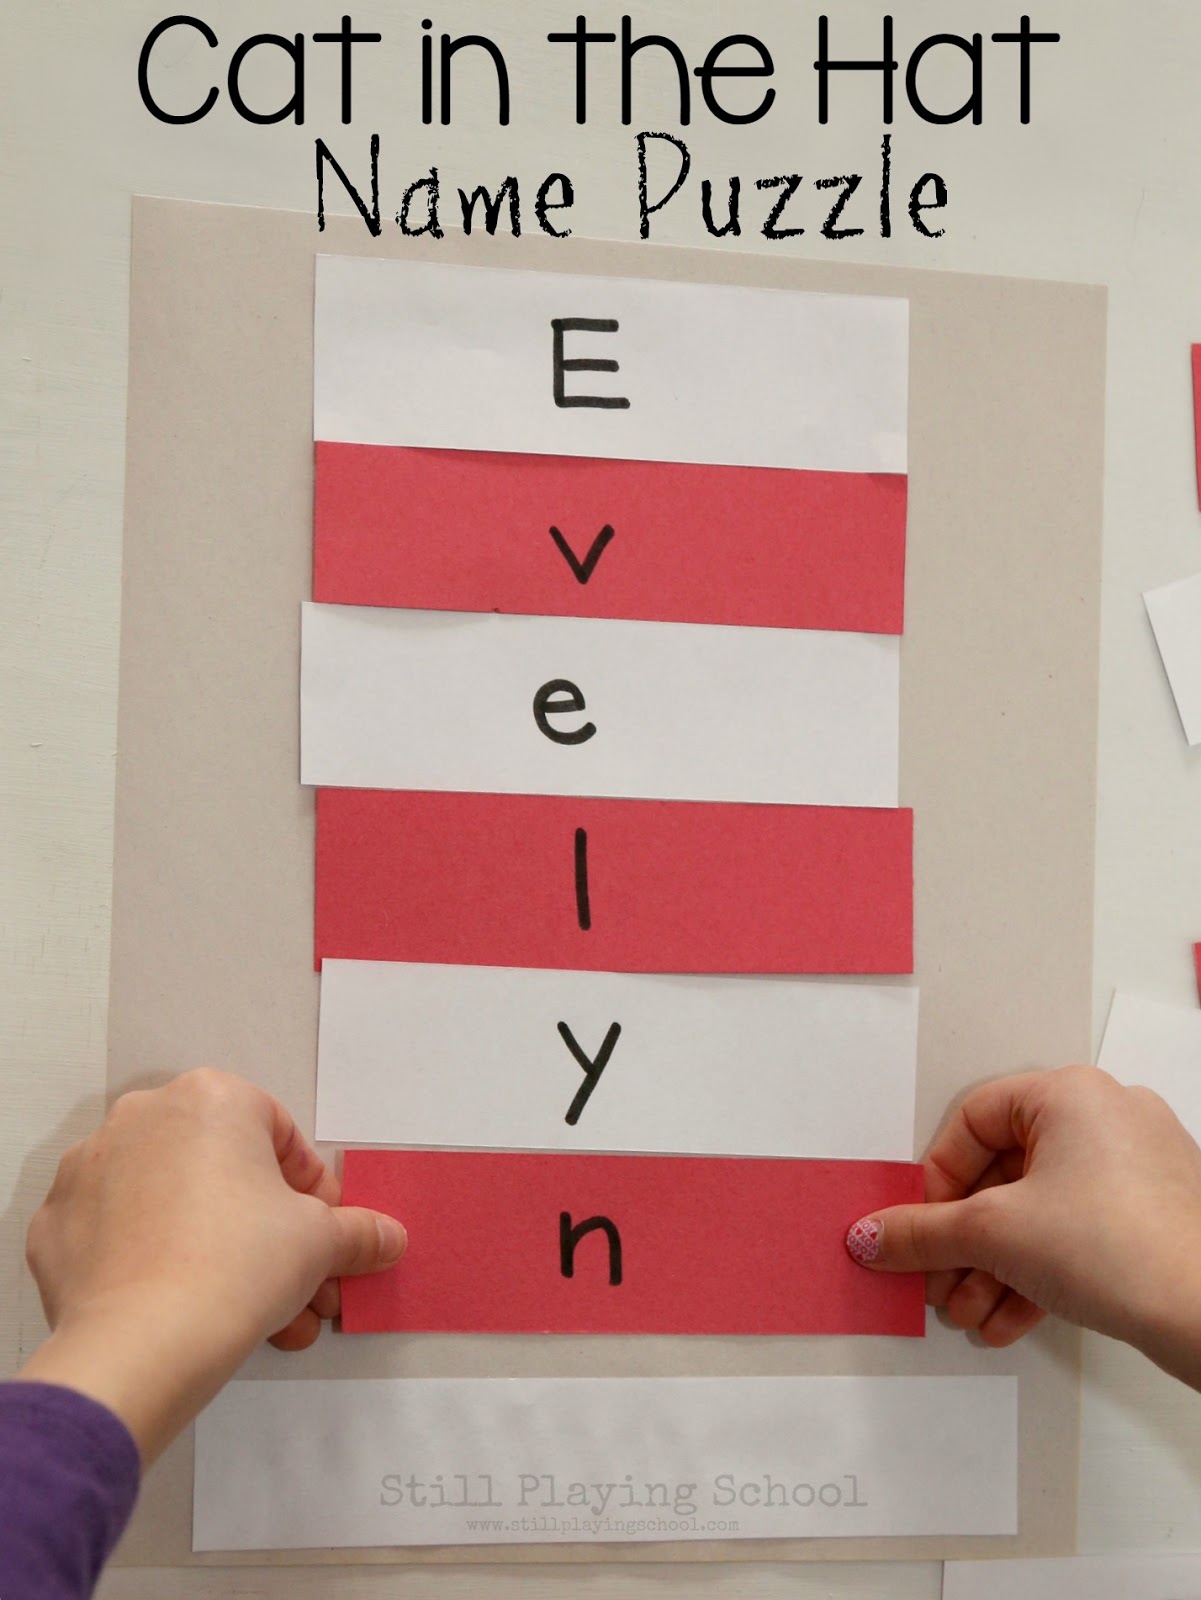 Dr. Seuss Cat in the Hat Name Puzzle Craft | Still Playing ...